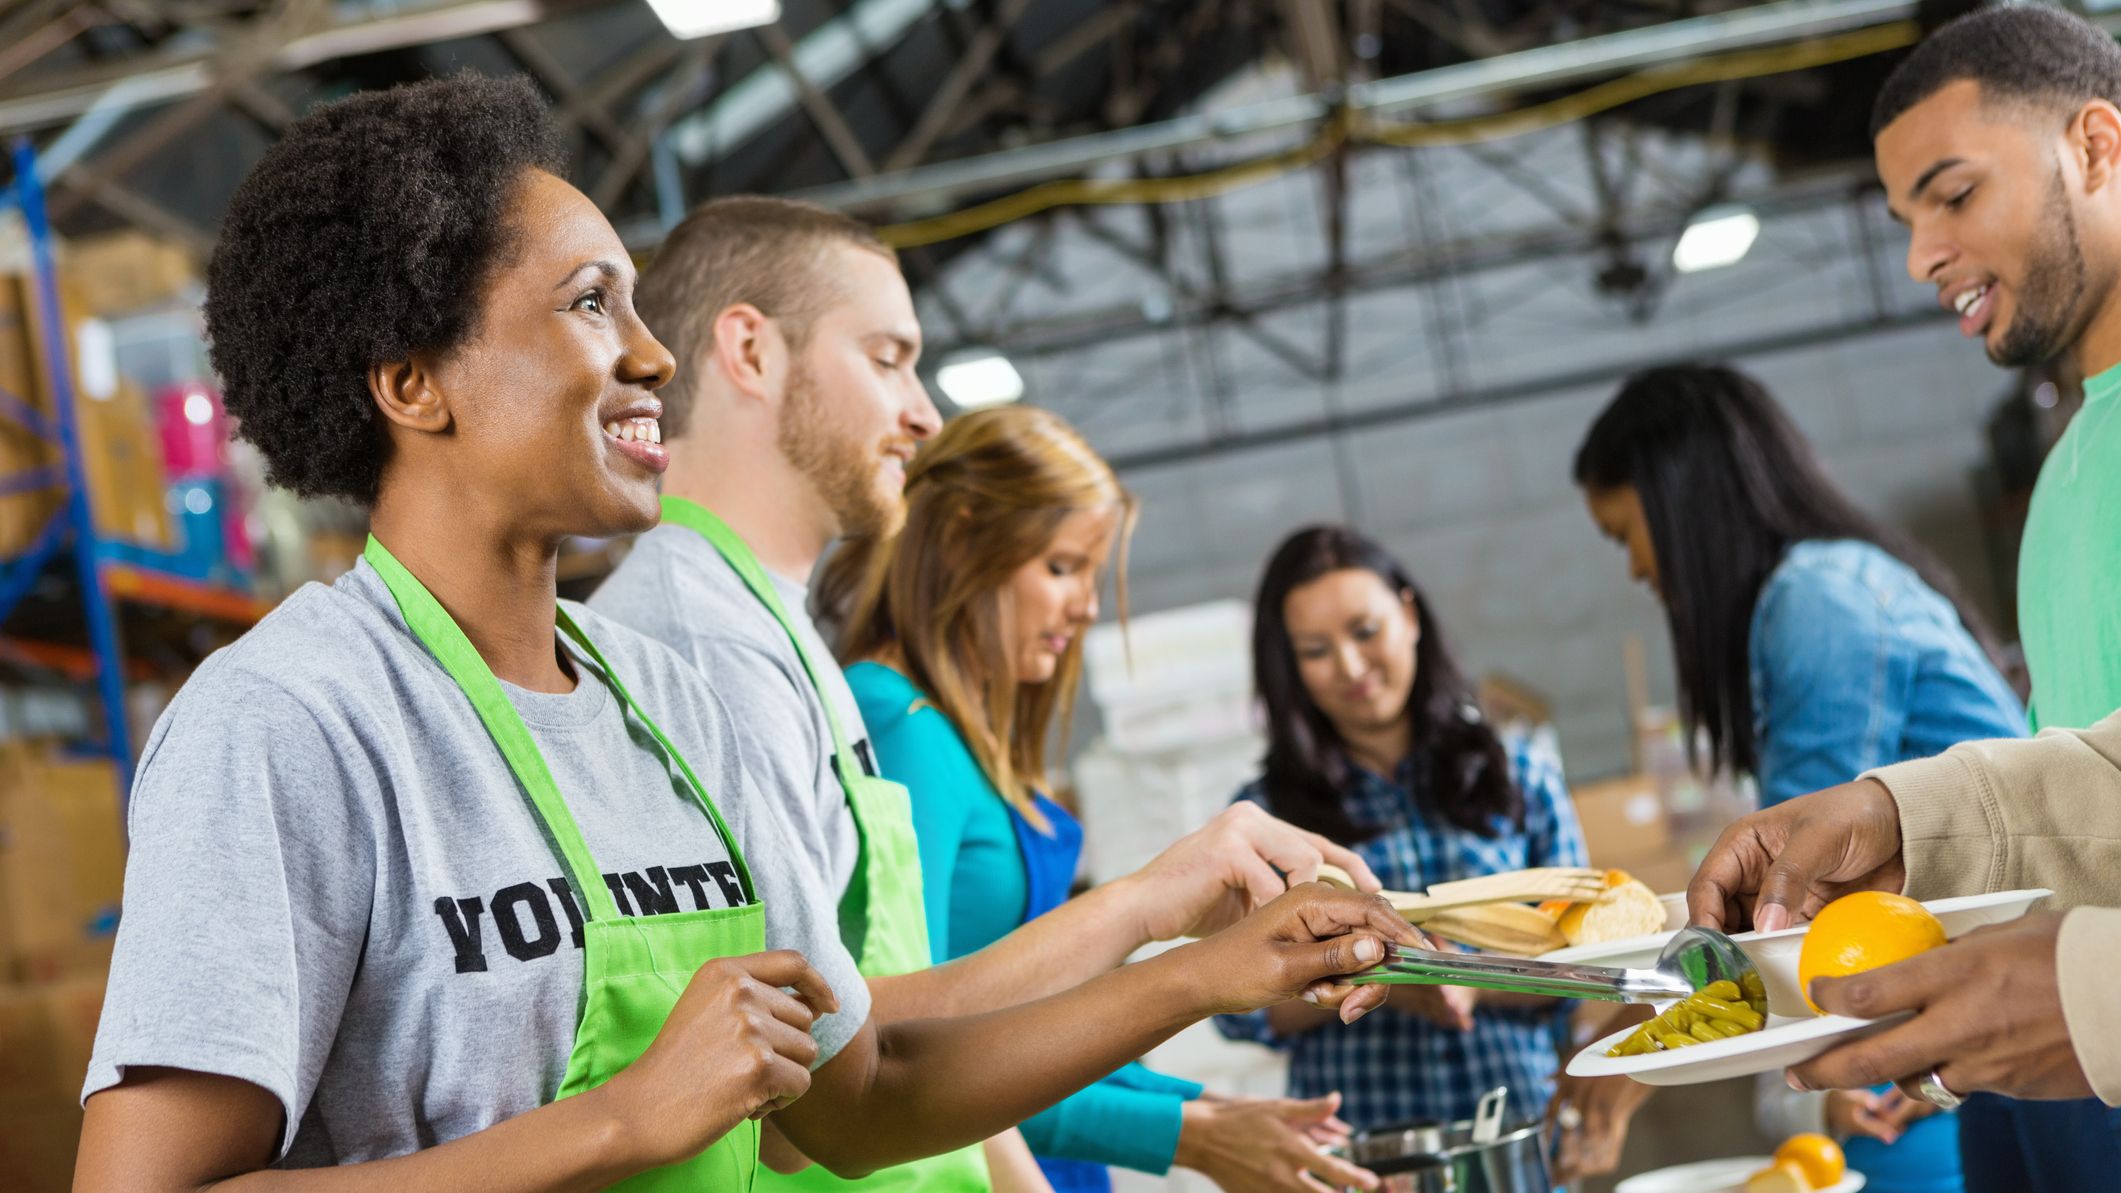 https://hips.hearstapps.com/hmg-prod/images/volunteers-serving-healthy-hot-meal-at-soup-kitchen-royalty-free-image-1599593367.jpg?crop=1xw:0.84355xh;center,top